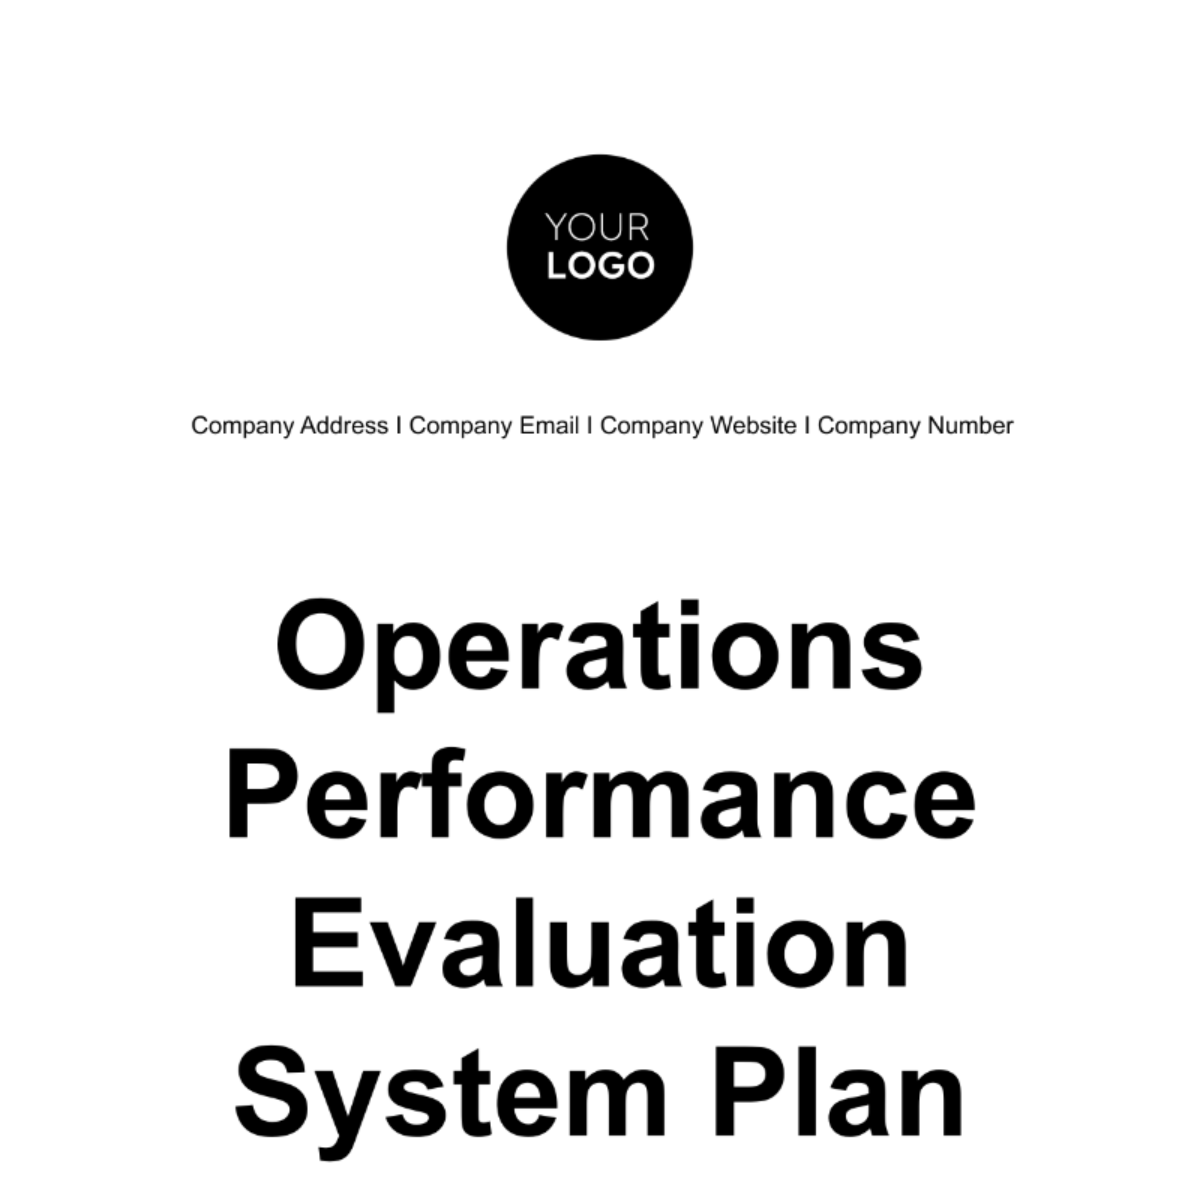 Operations Performance Evaluation System Plan Template